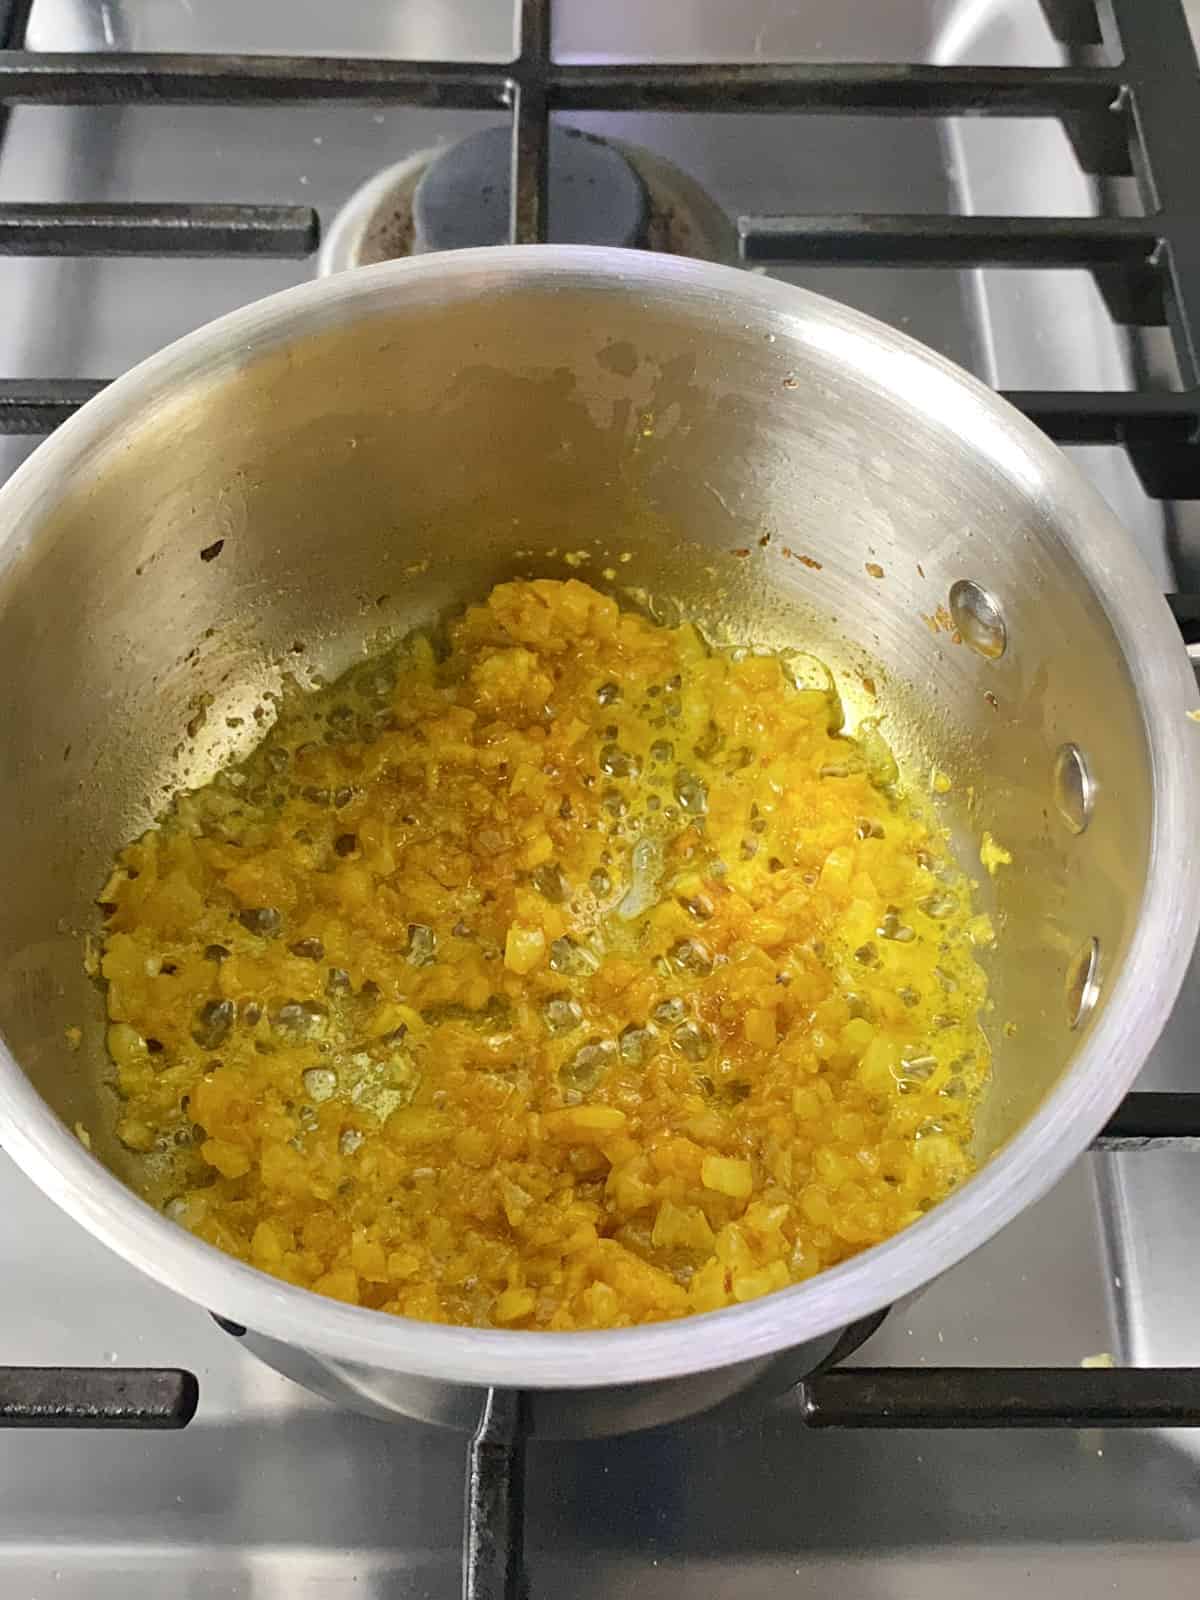 Saute ground turmeric with the chopped onions and olive oil.